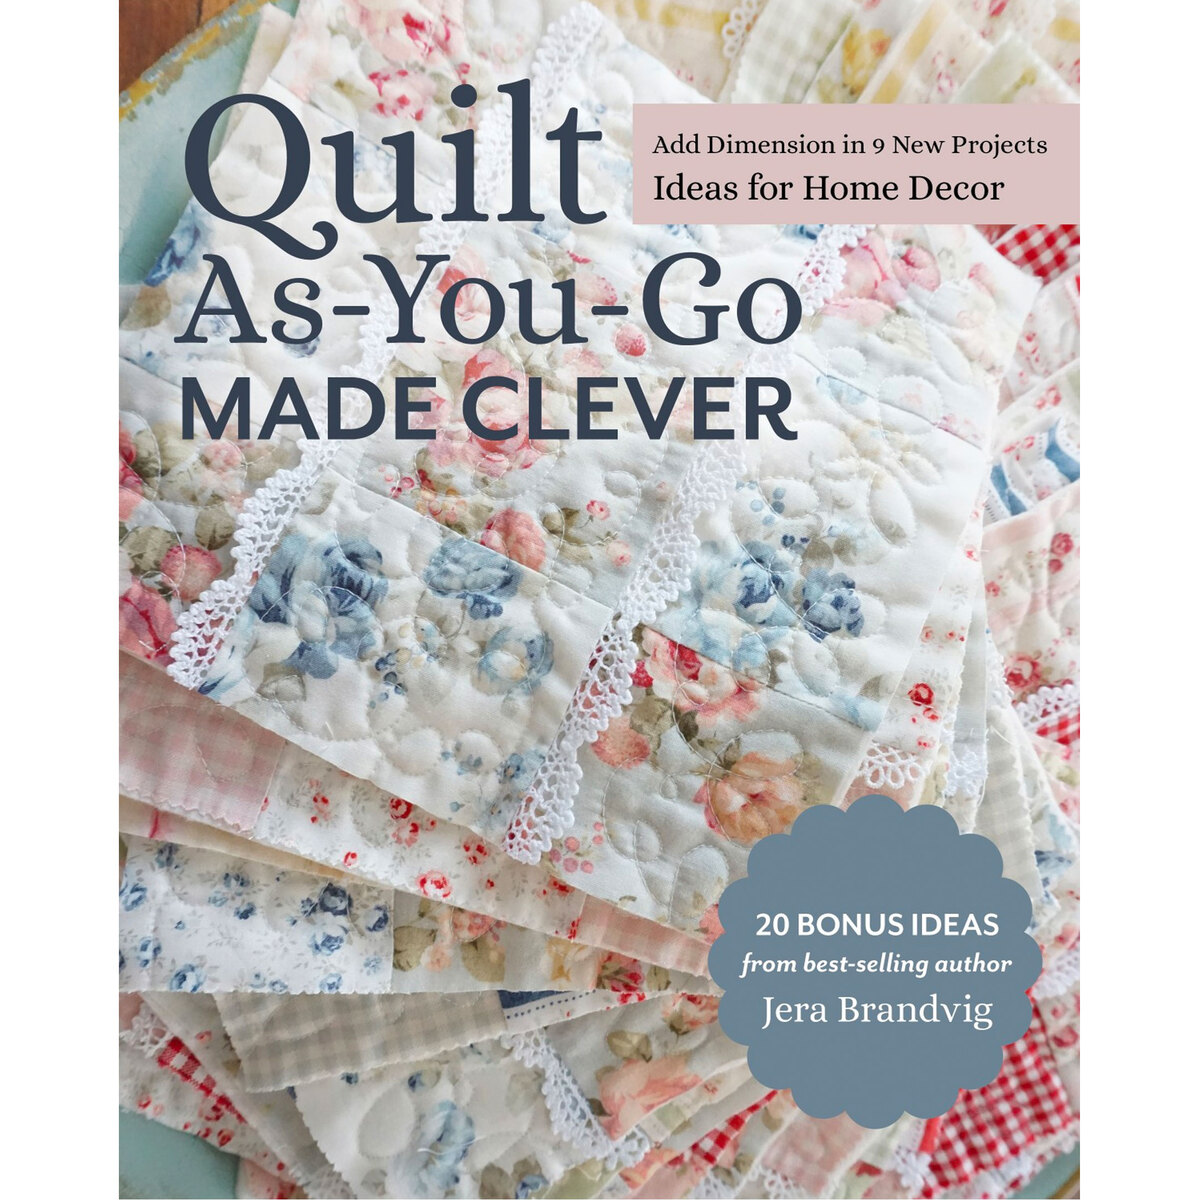 Quilt As-You-Go Made Clever by Jera Brandvig 9781644030233 - Quilt in a Day  Patterns